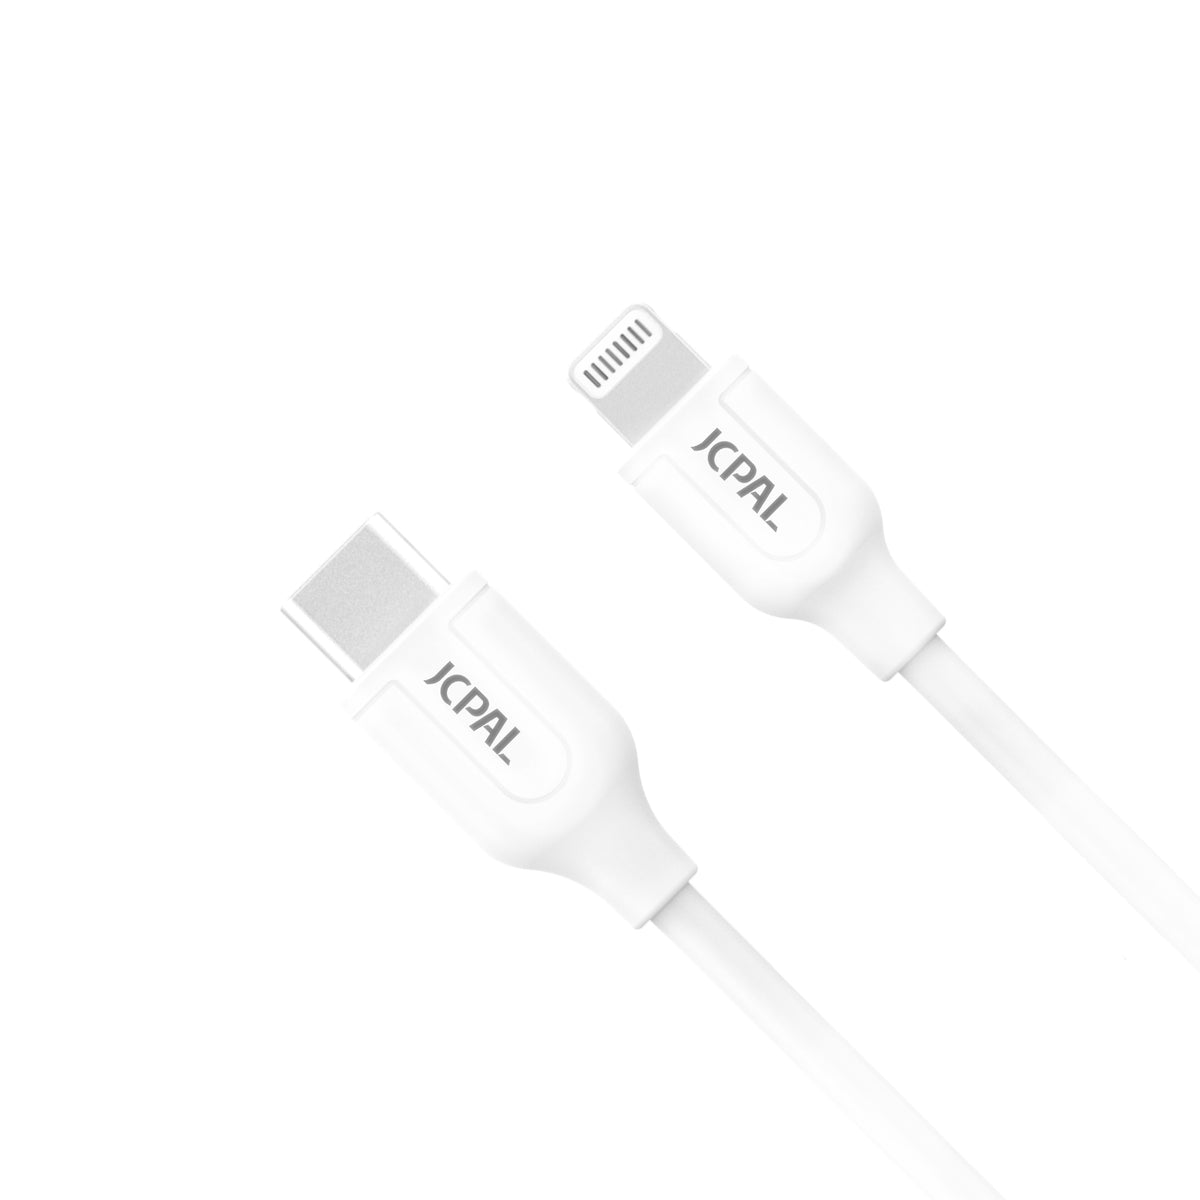 Classic USB-C Cable with Lightning Connector